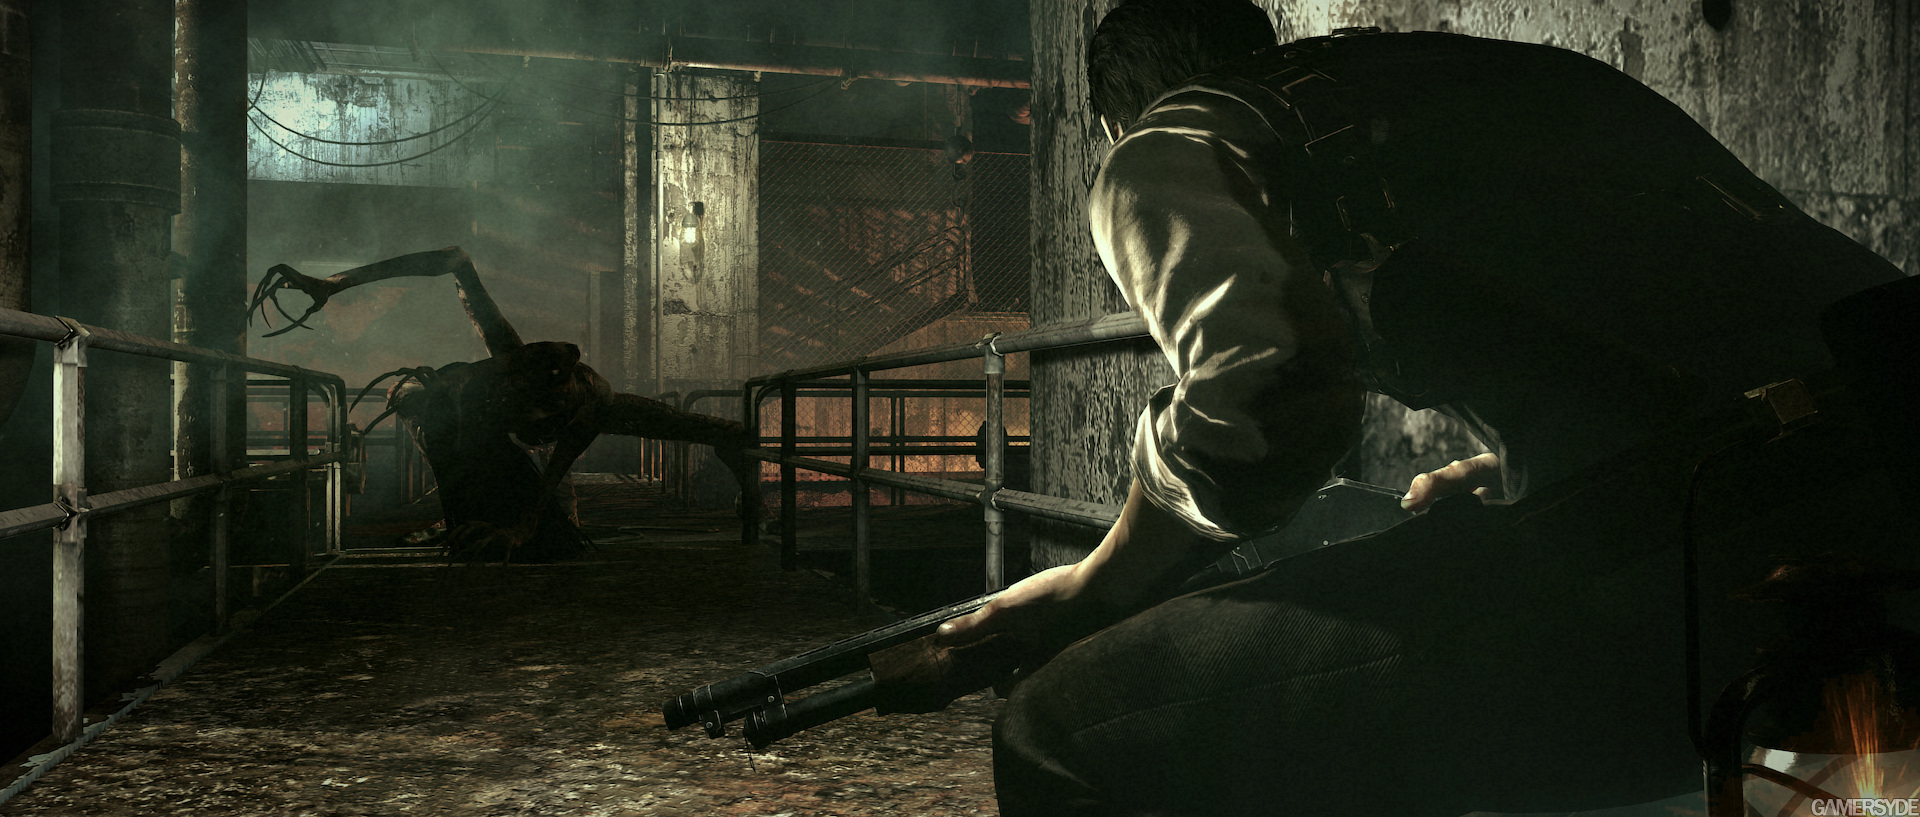 image_the_evil_within-25967-2706_0004.jpg